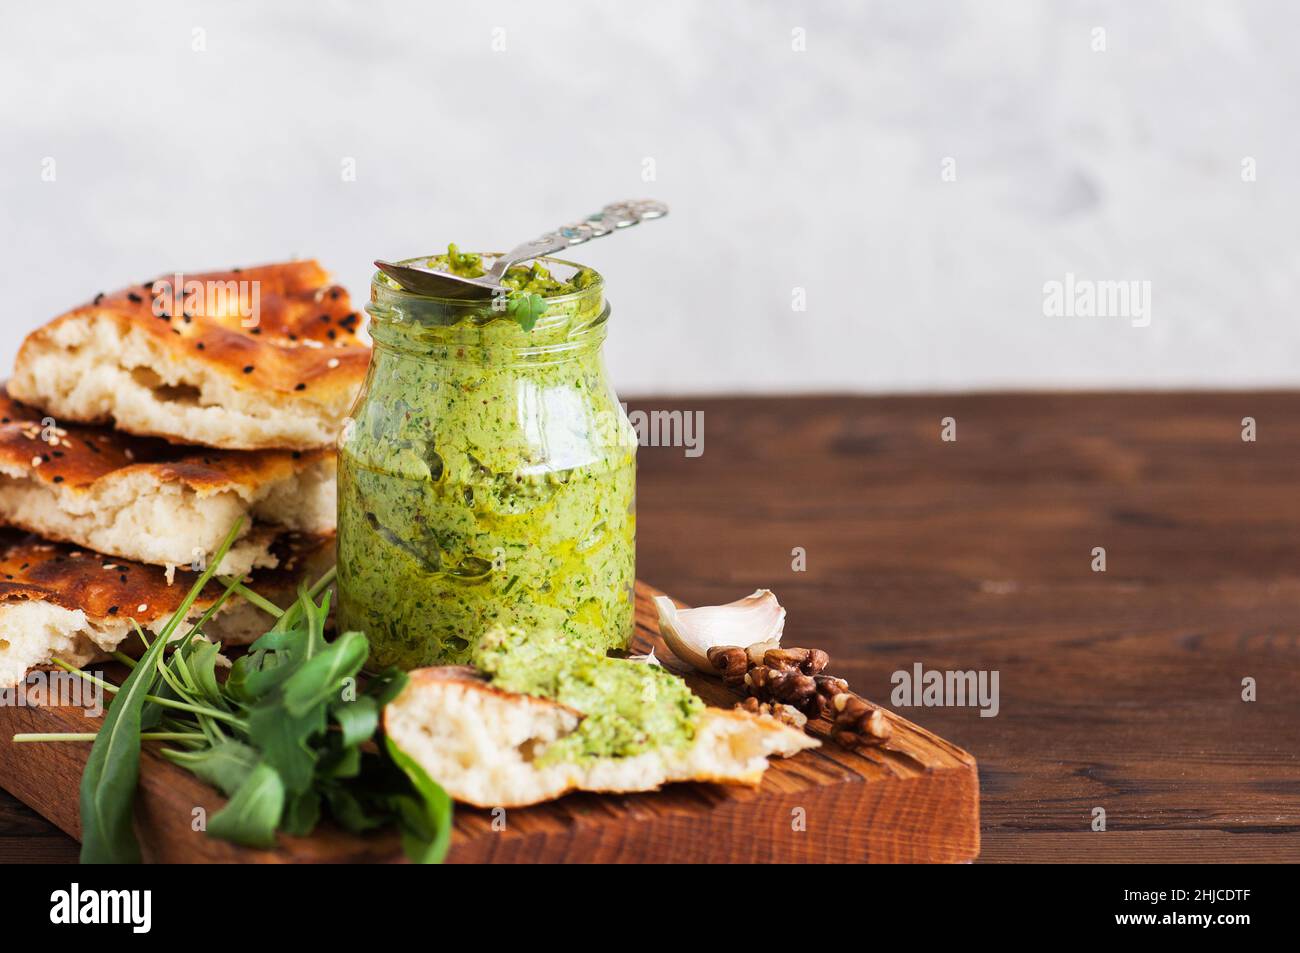 Green pesto sauce in a jar on a wooden board. Stock Photo